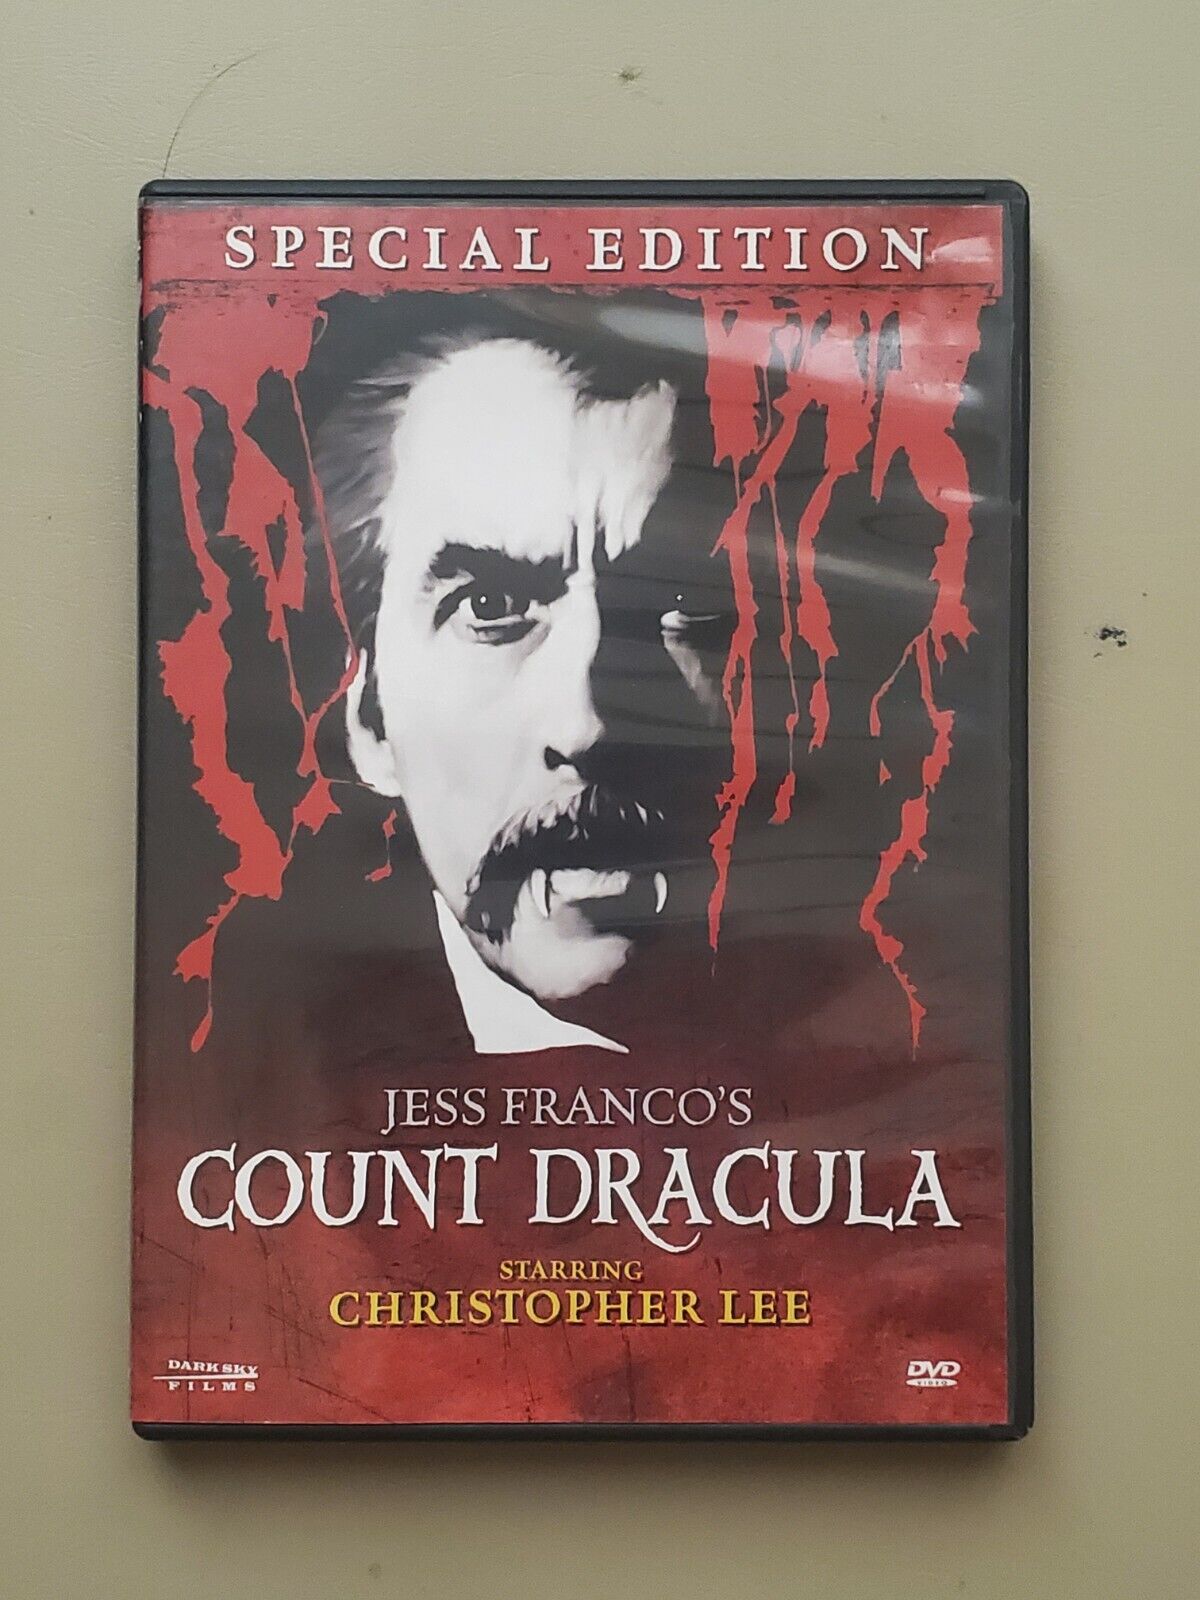 Count Dracula - Darkside Records